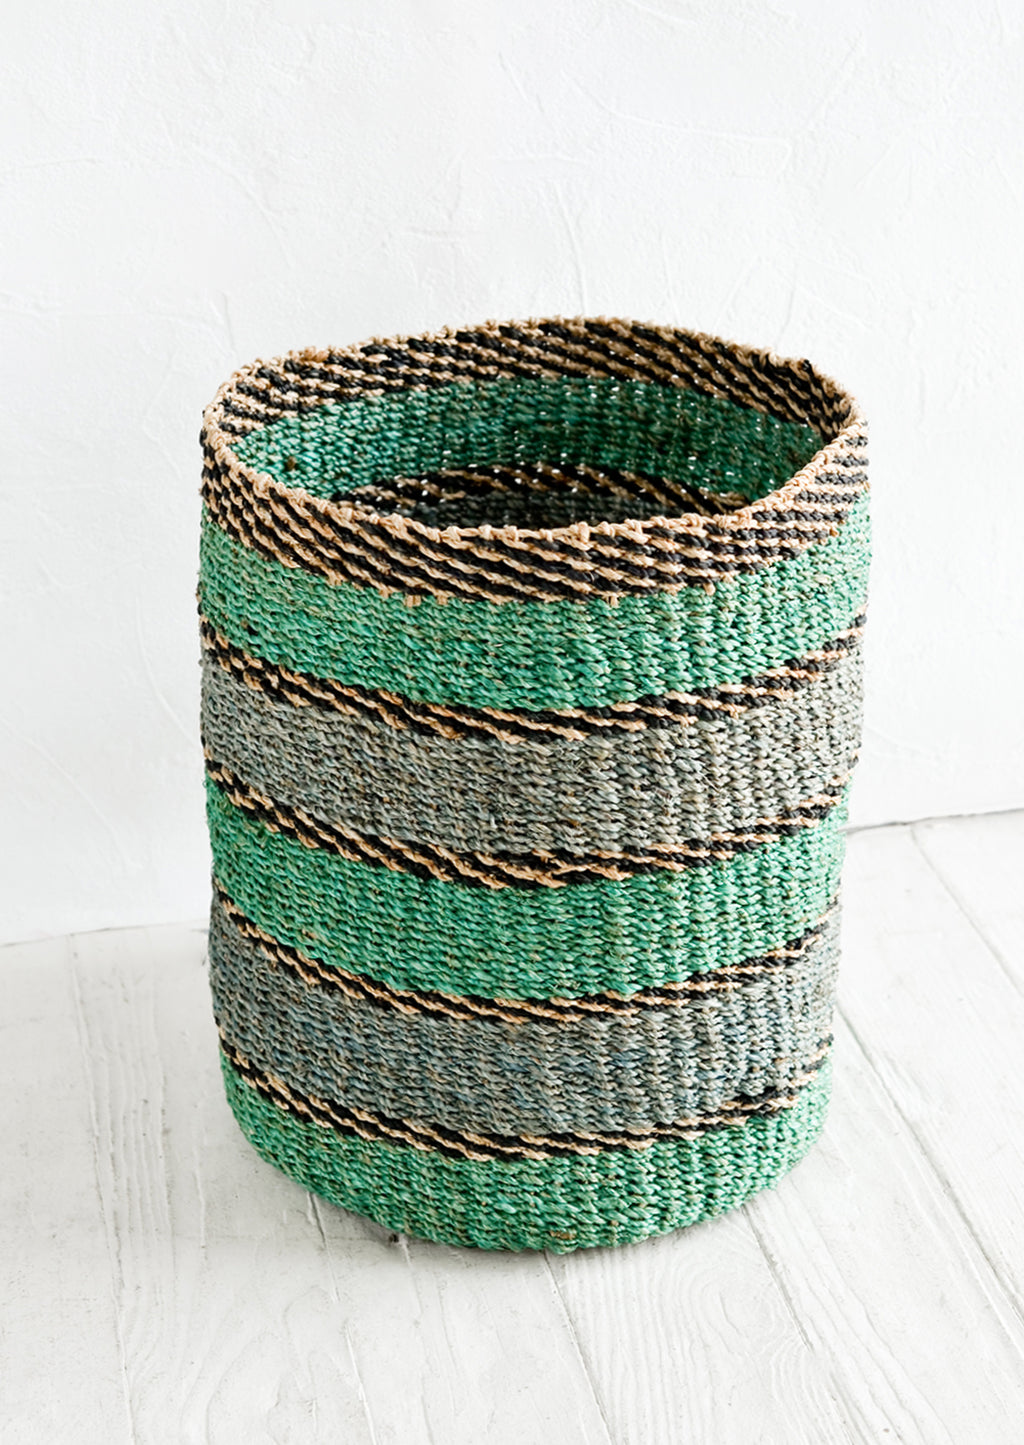 Medium / Turquoise Multi: A medium woven straw storage basket in a turquoise and blue stripe print.